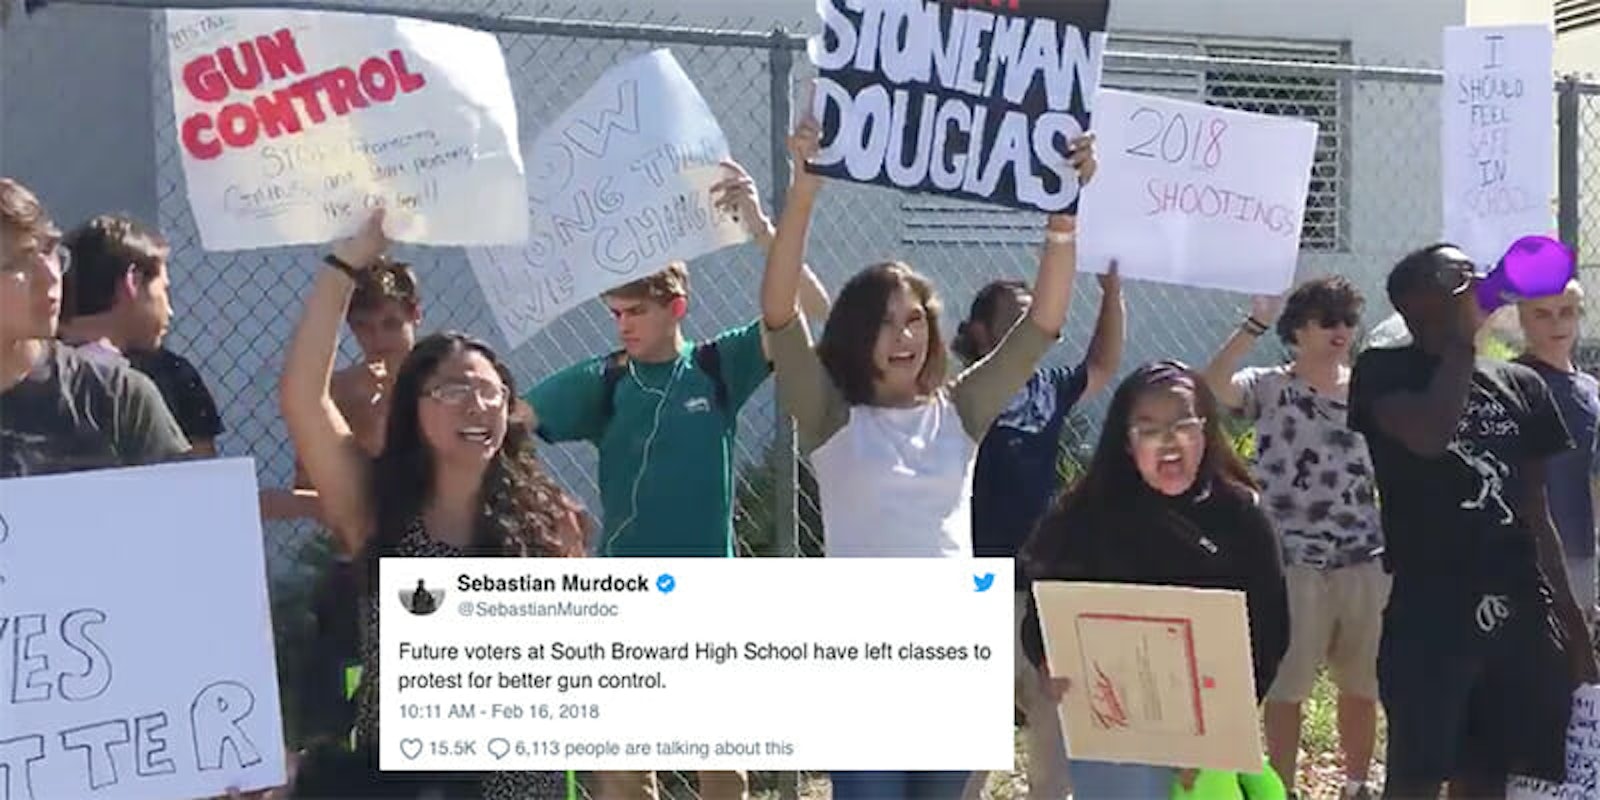 High school students in Florida protested gun violence after the shooting at Marjory Stoneman Douglas High School